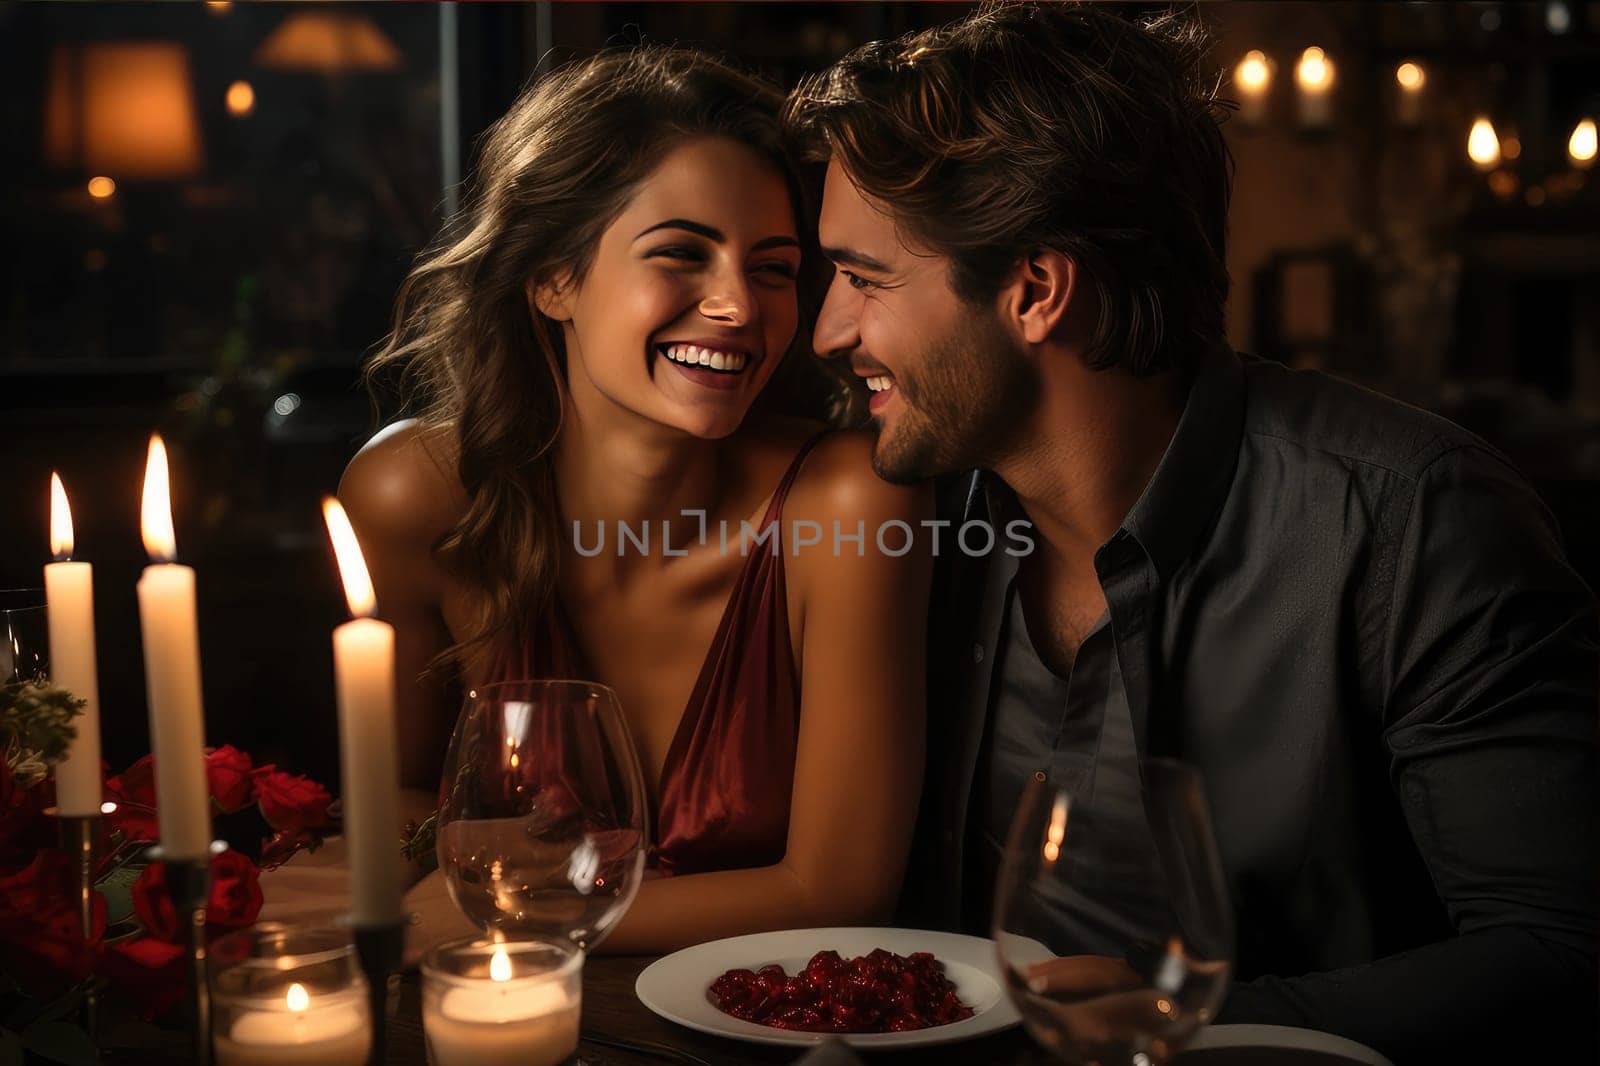 A woman creates a sweet ritual while hosting a romantic dinner for her husband on Valentine's Day. She takes care of every detail to create an atmosphere of love, passion and sweetness